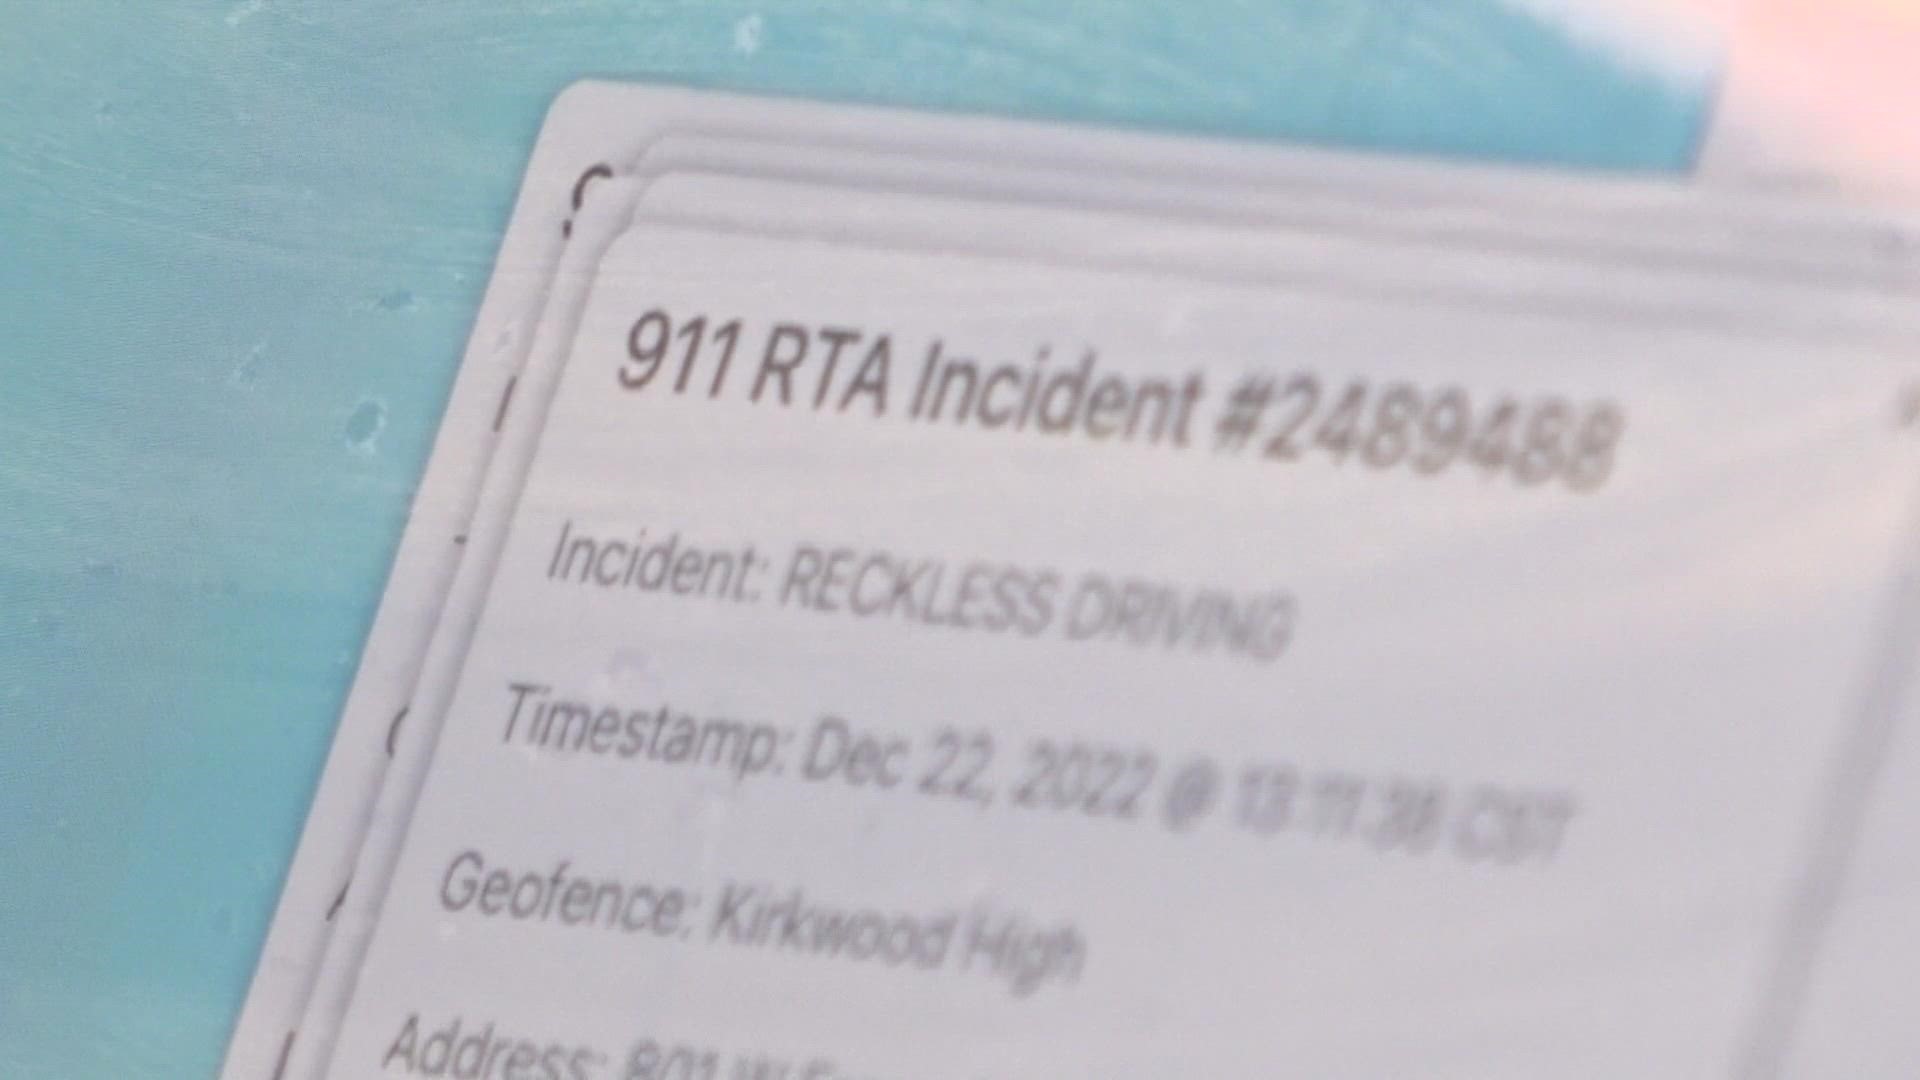 911RTA allows school officials to monitor the 911 calls that have been placed on or near school property. It allows schools to act fast in an emergency situation.